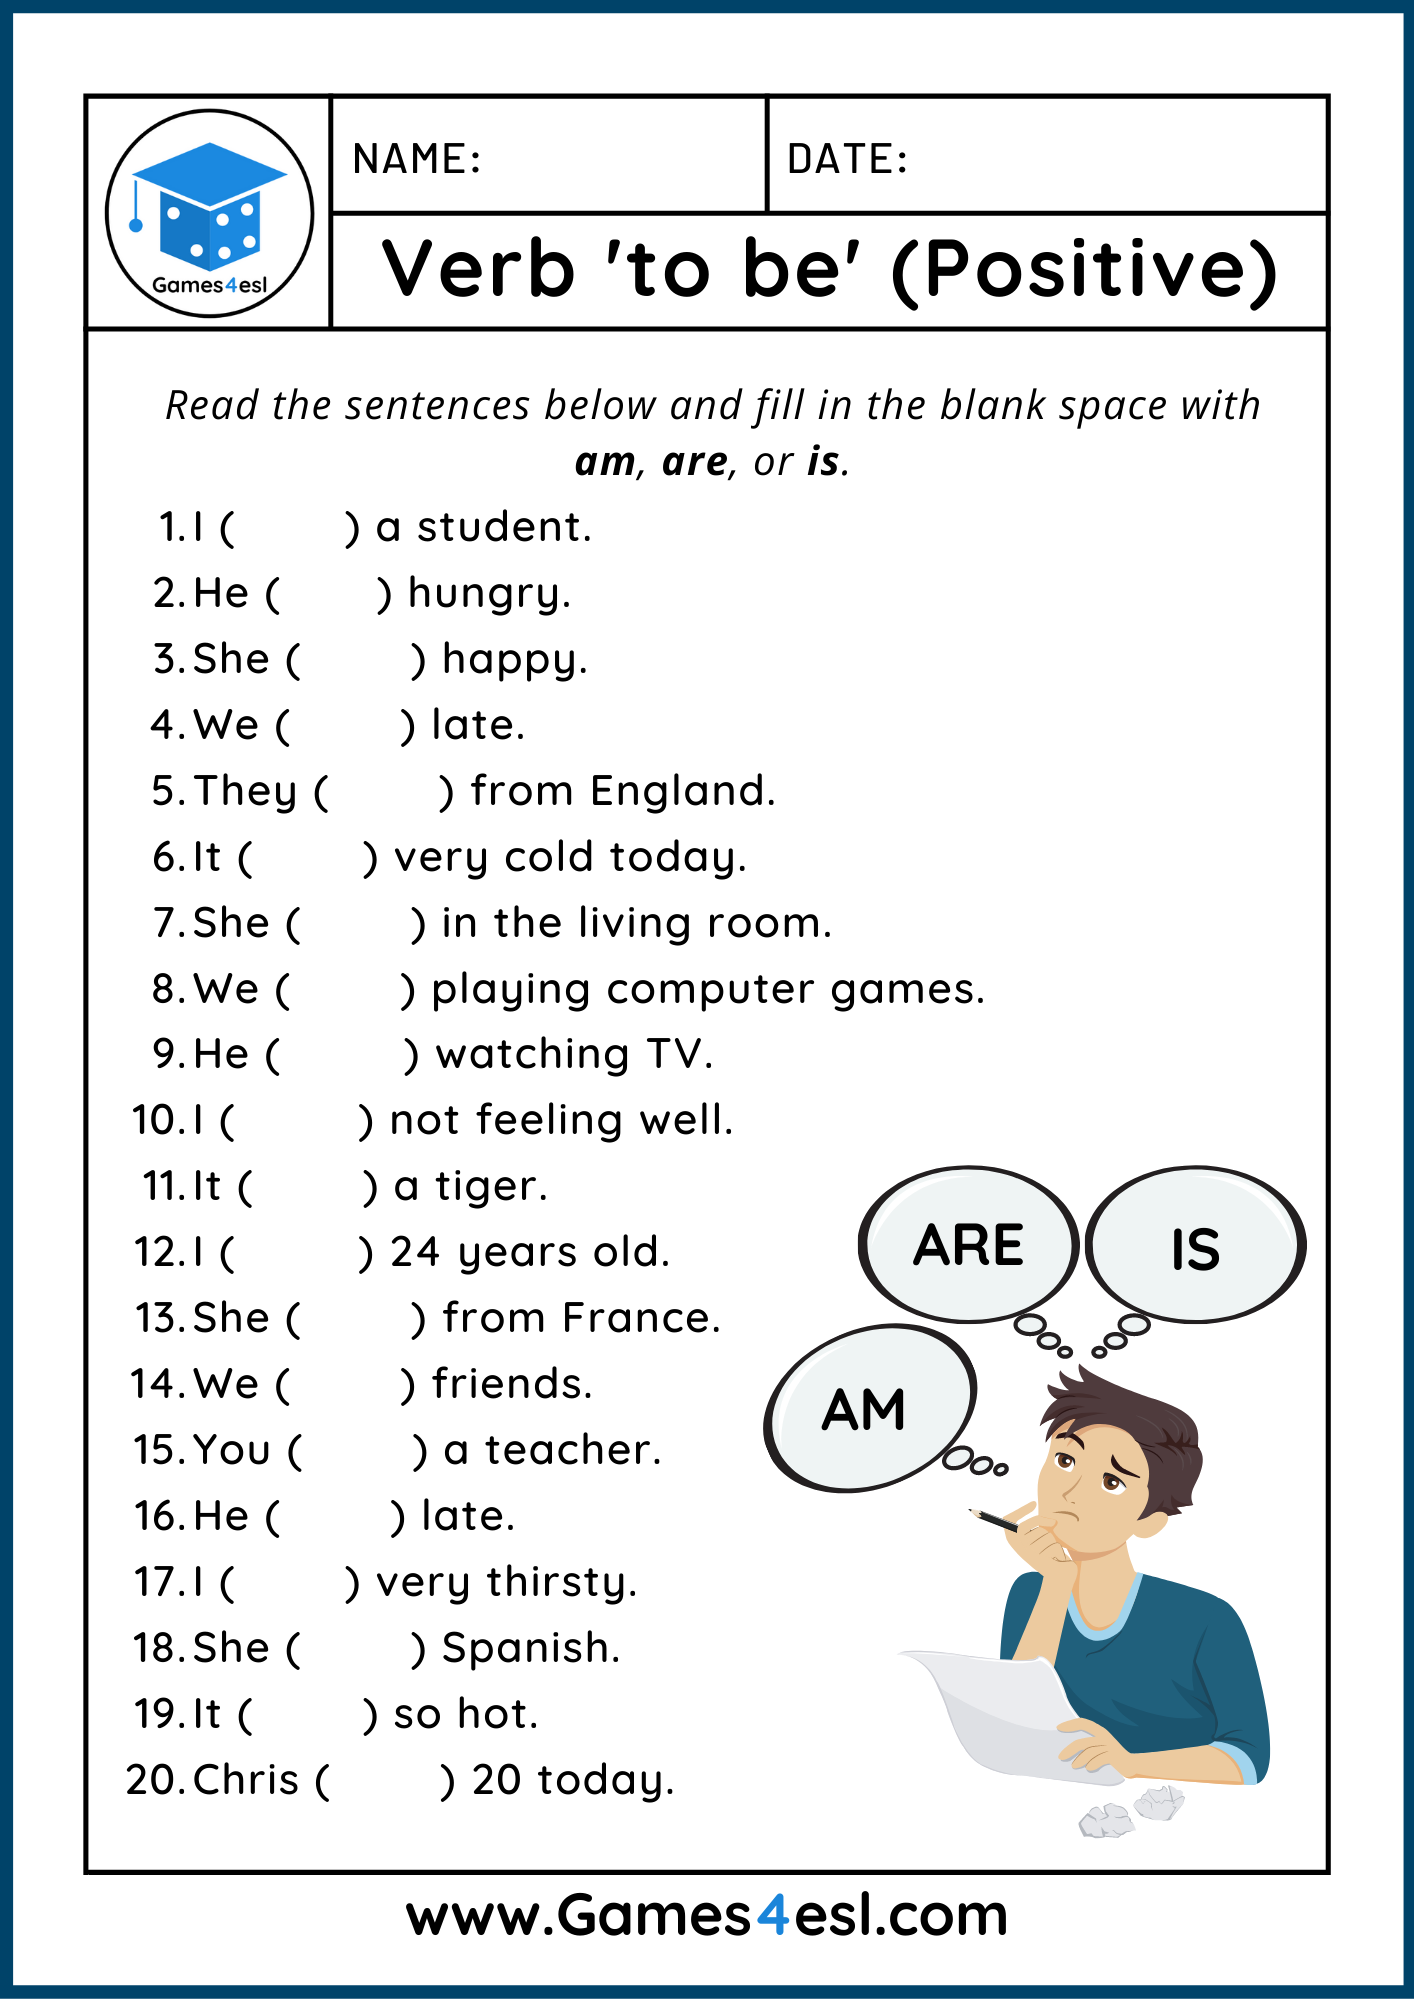 verb-to-be-worksheets-games4esl-subject-and-verb-agreement-exercise-purdue-owl-purdue